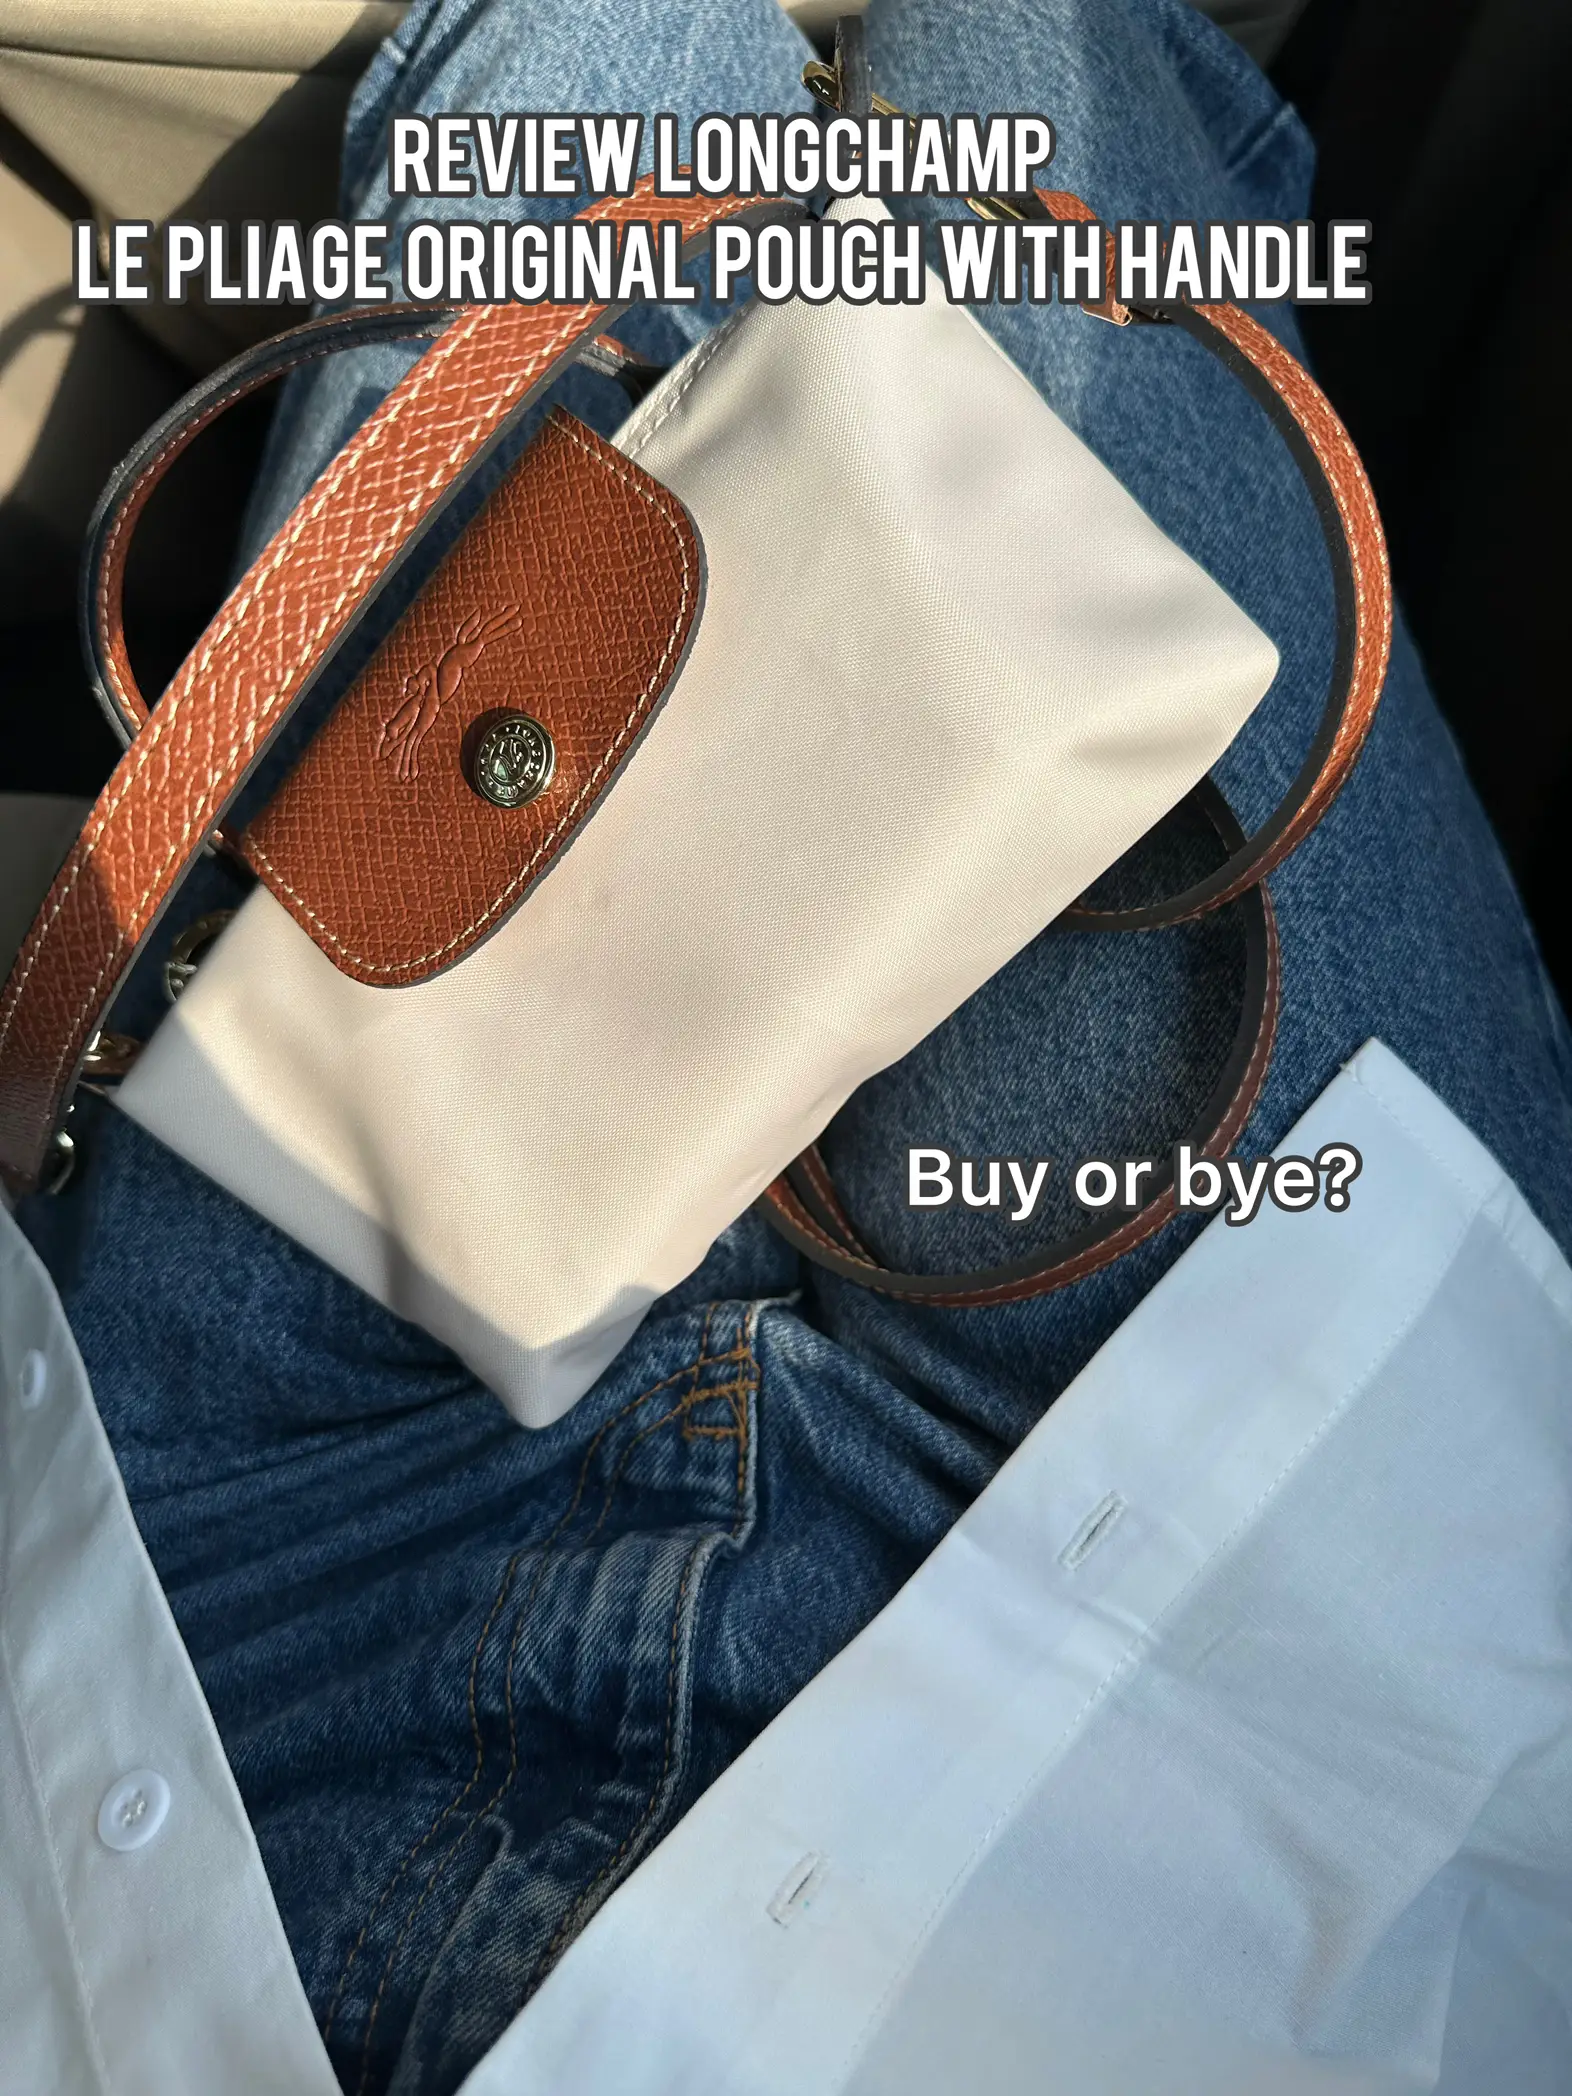 Longchamp Le Pliage Original Pouch with Handle Unboxing and Review